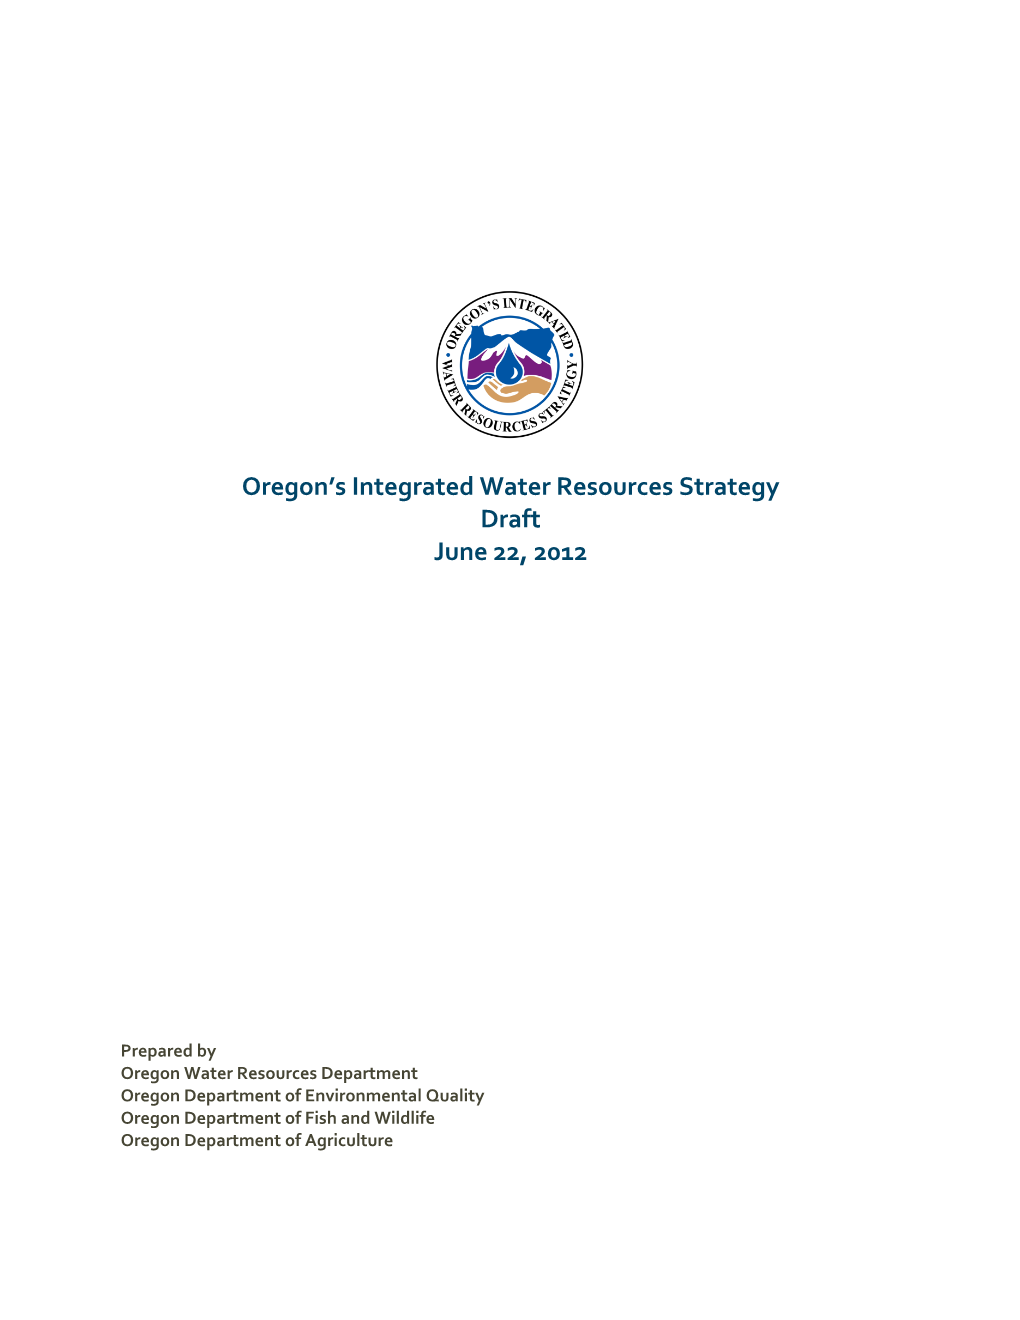 Draft IWRS / Integrated Water Resource Strategy 6/22/12